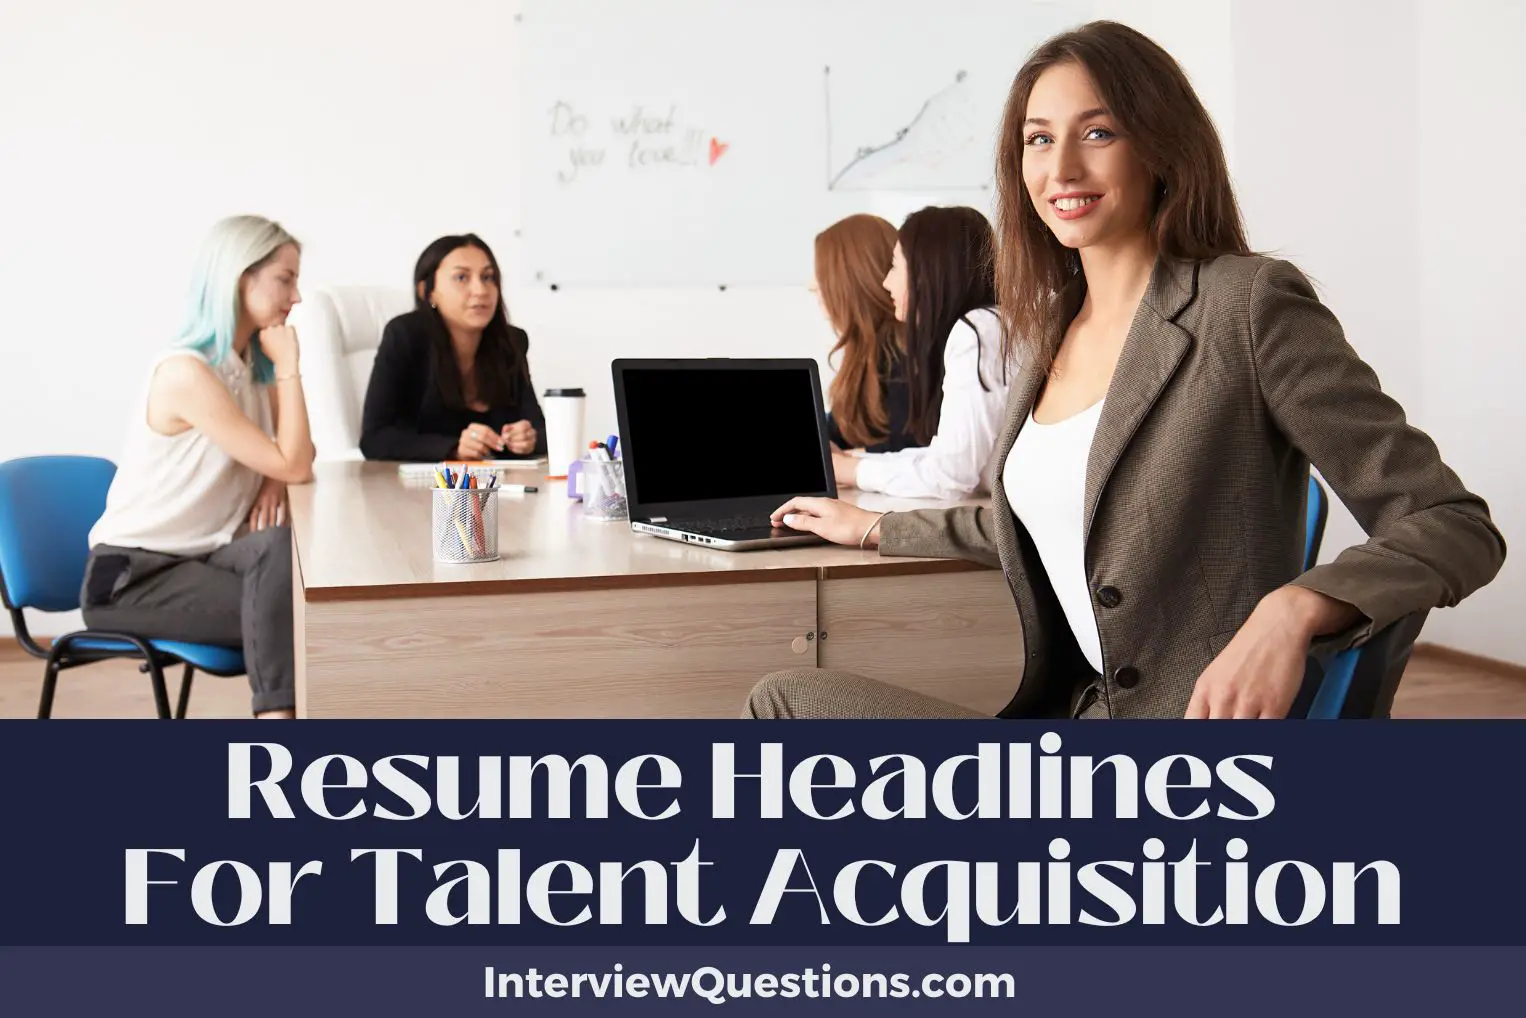 Resume Headlines For Talent Acquisition